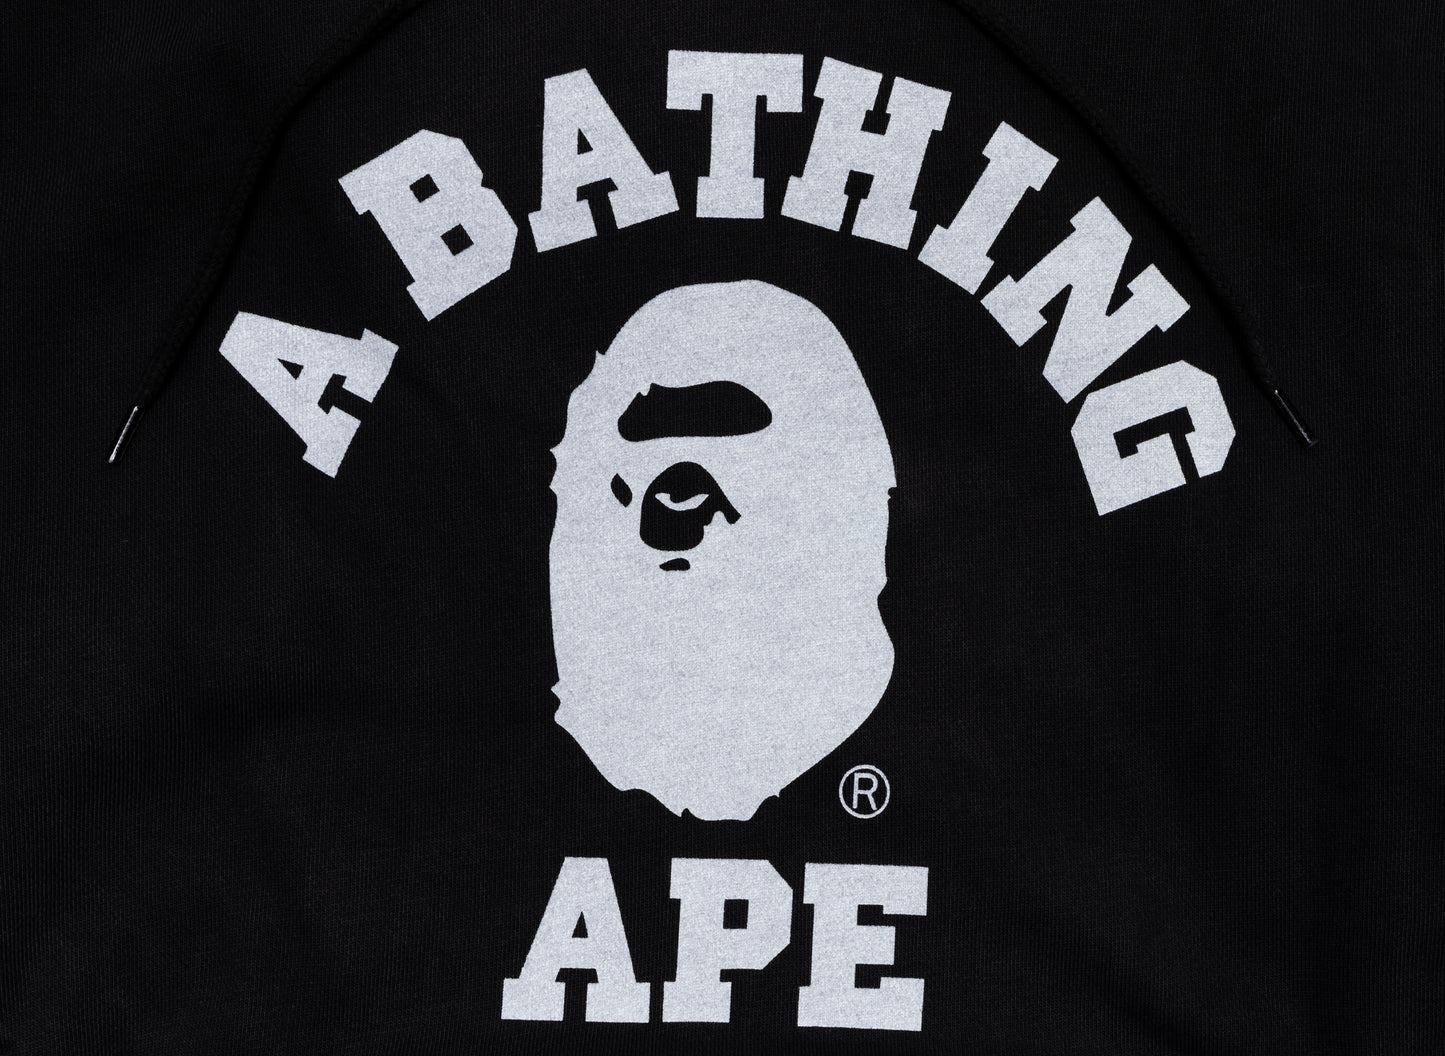 A Bathing Ape College Overdye Pullover Hoodie in Black